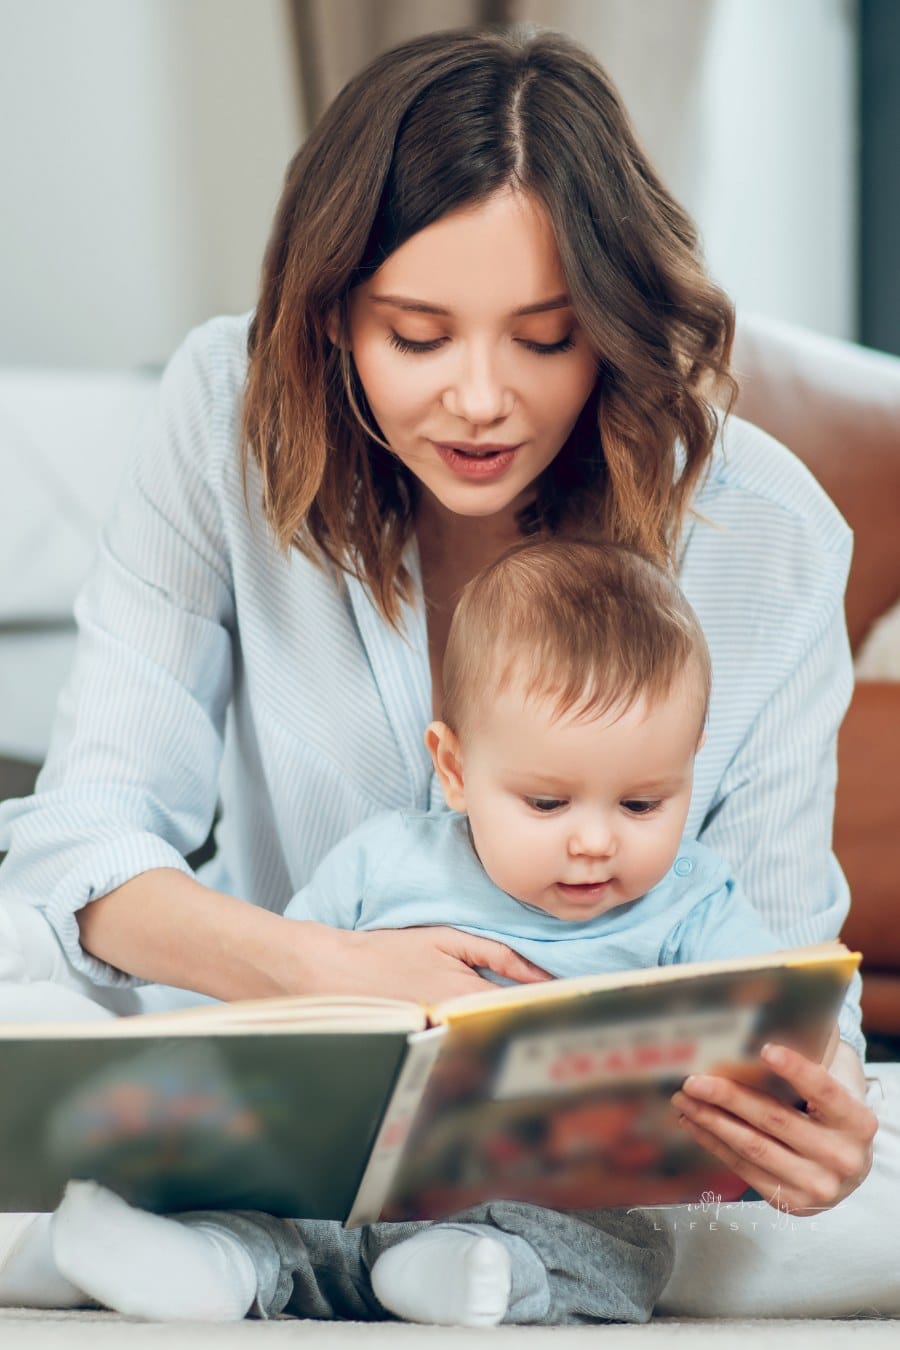 attentive mother reading book to small child sitting together on floor at home